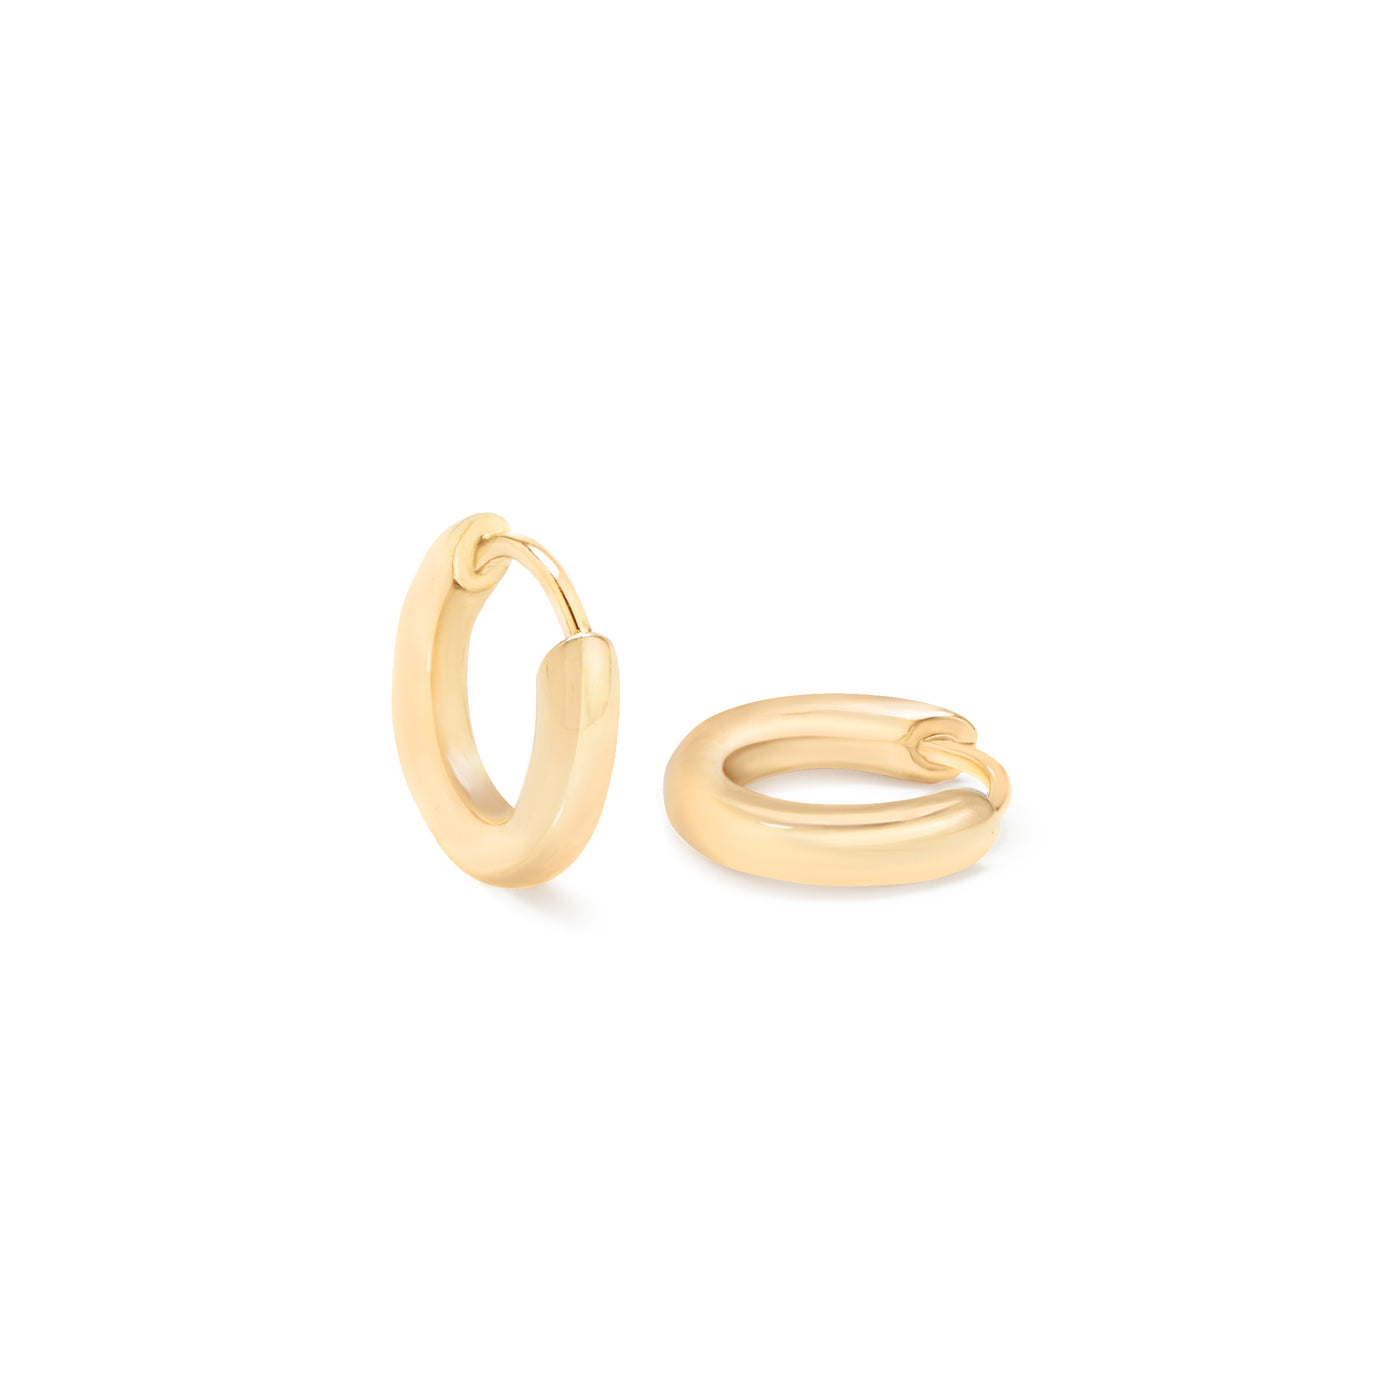 yellow gold hoops on white background